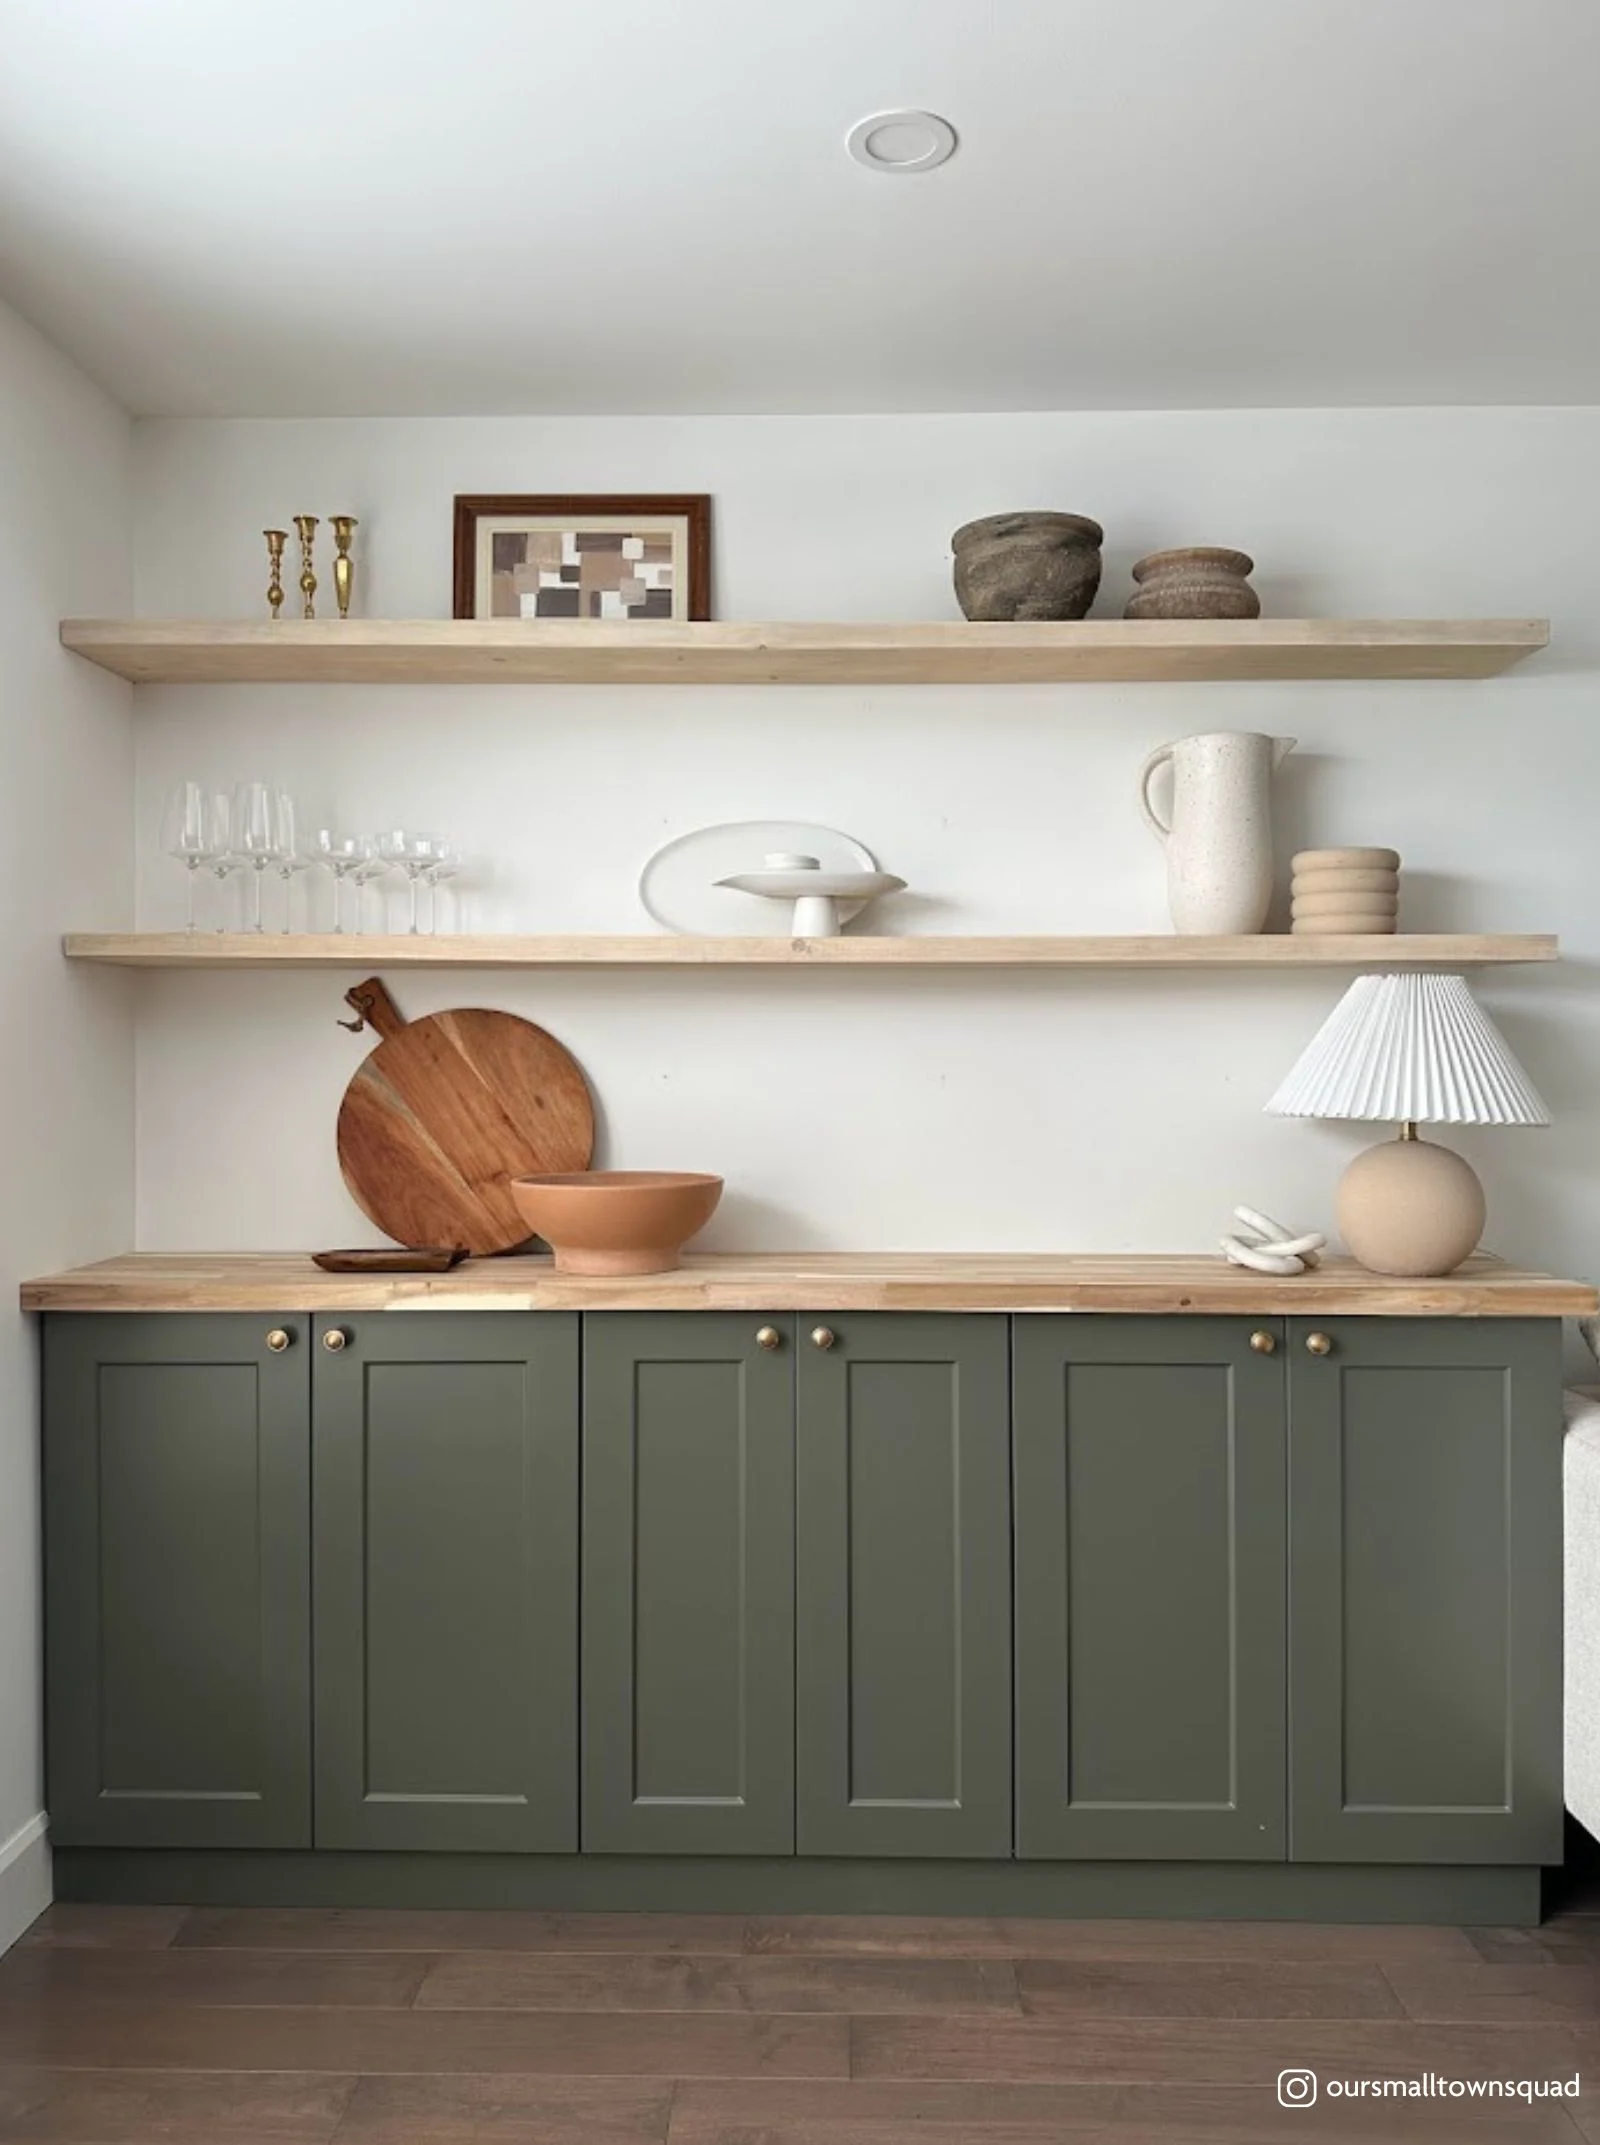 Here'S How To Make Built-In Dining Room Cabinets With Floating Shelves |  Home Hardware